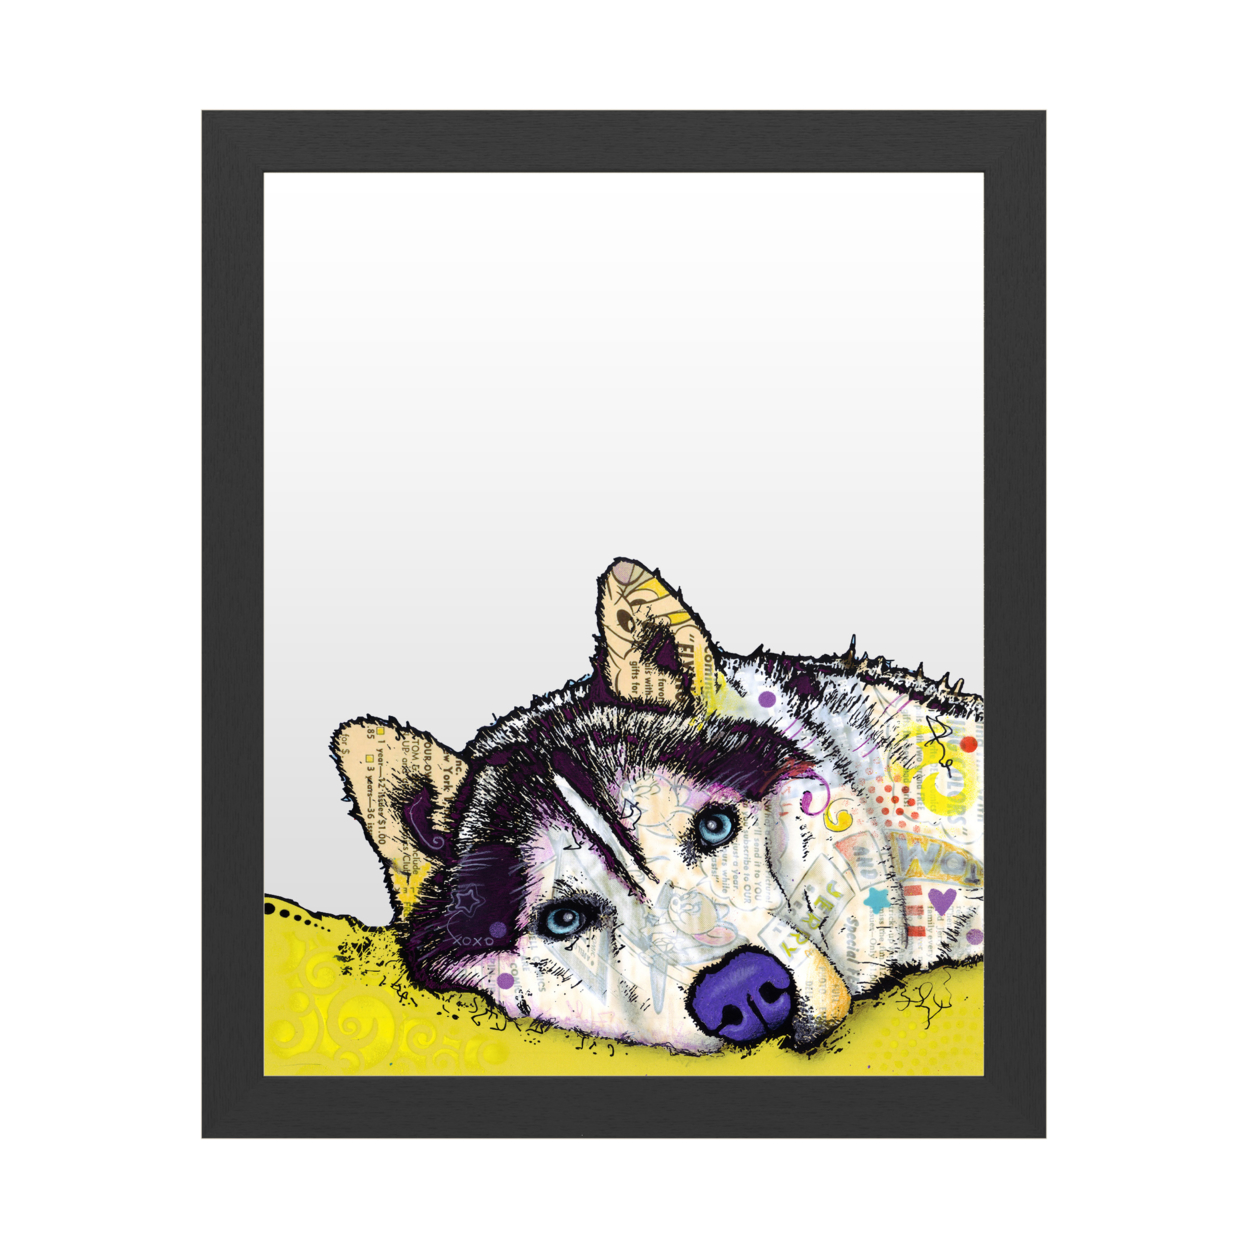 Dry Erase 16 X 20 Marker Board With Printed Artwork - Dean Russo Siberian Husky II White Board - Ready To Hang